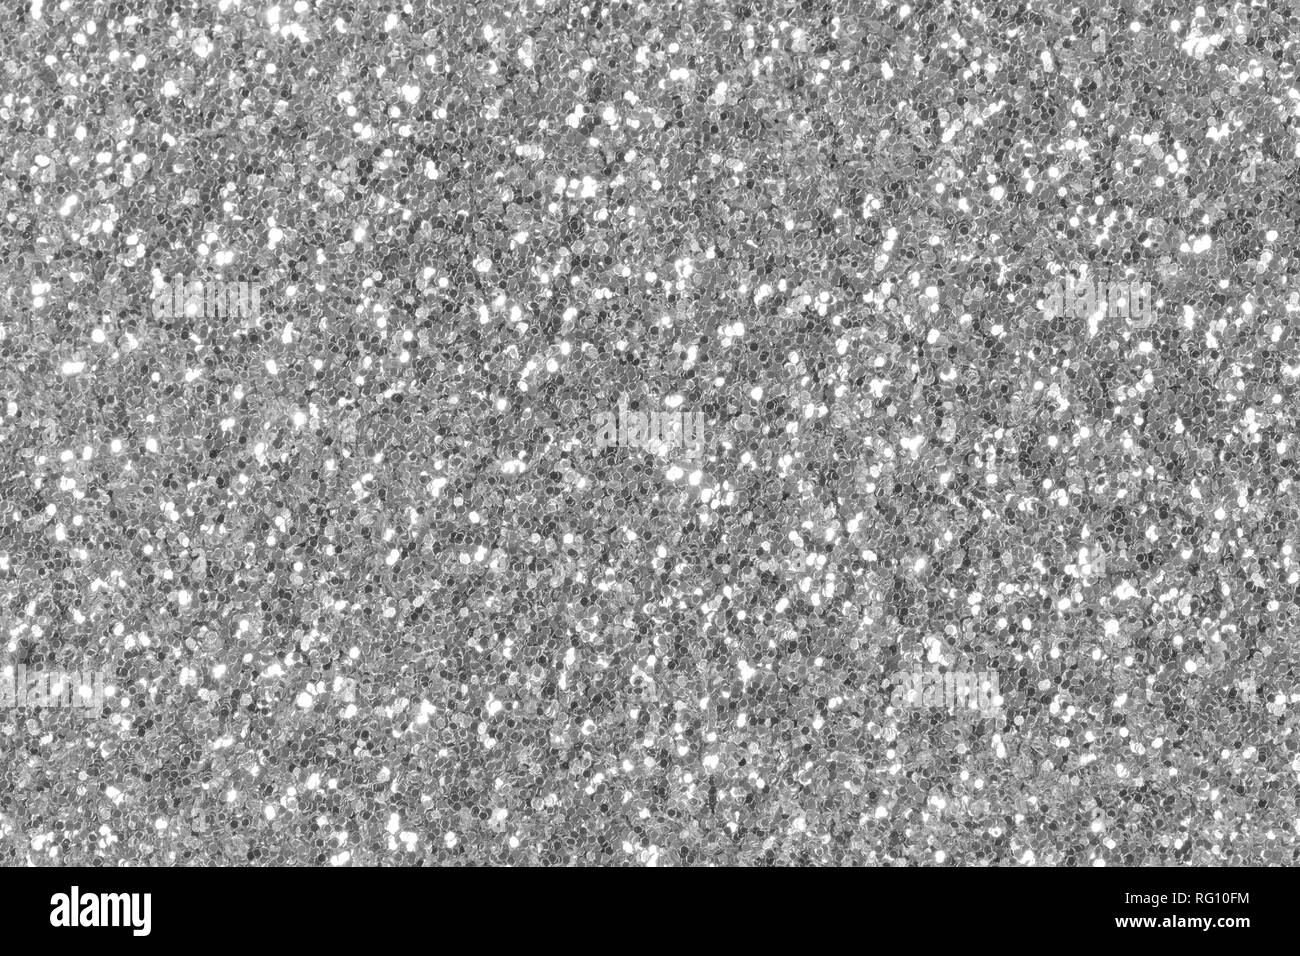 Shimmer background Black and White Stock Photos & Images - Alamy